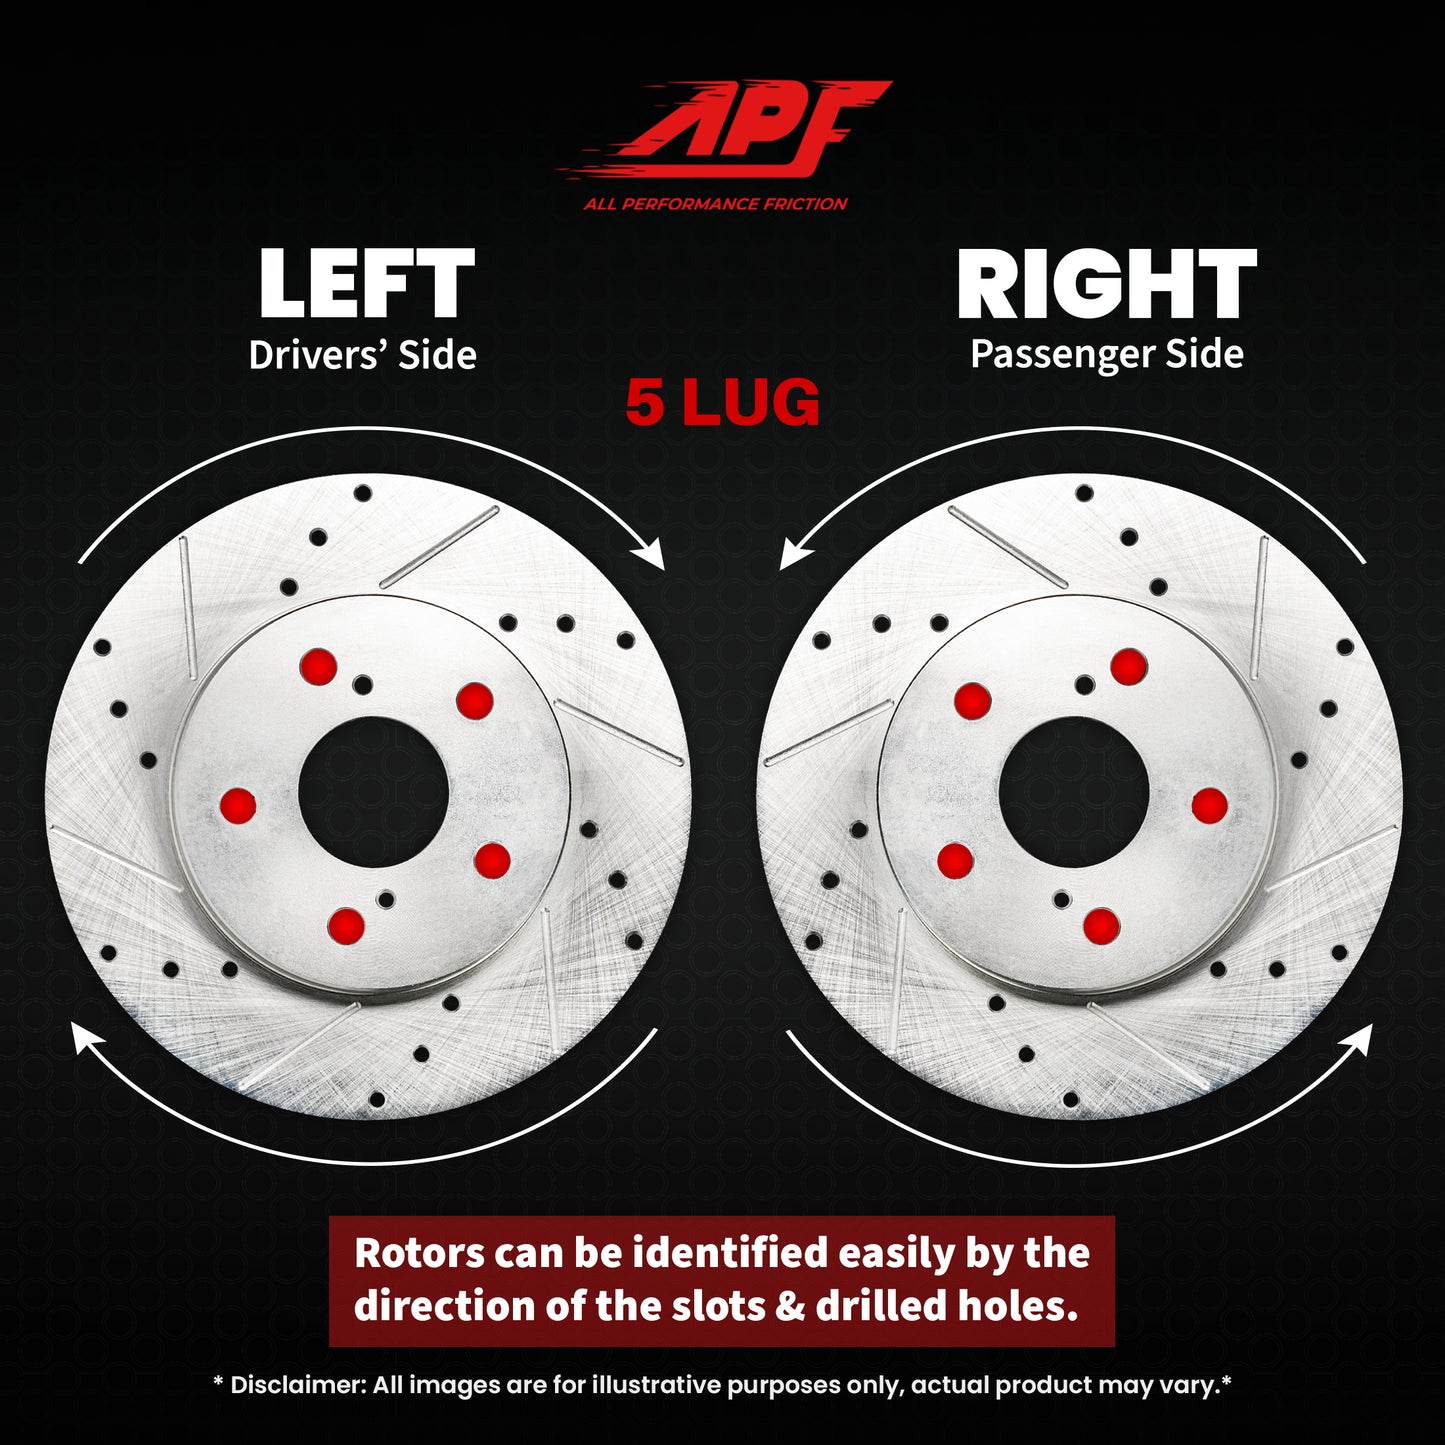 APF All Performance Friction Front Rotors compatible with Mazda Tribute 2005-2011 Zinc Drilled Slotted Rotors | $102.87